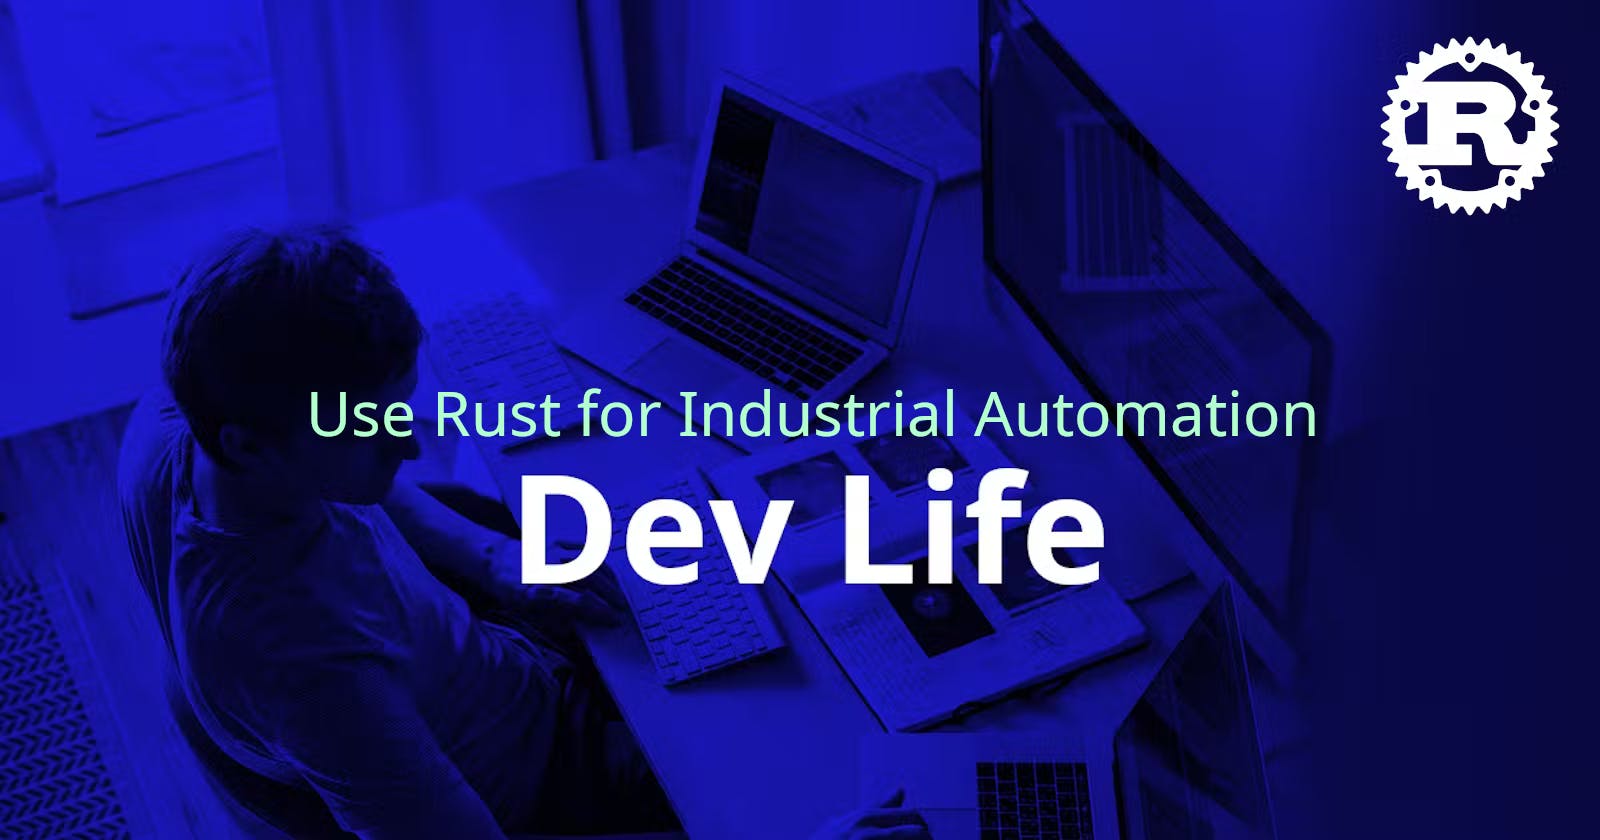 Industrial Automation Made Safer with Rust